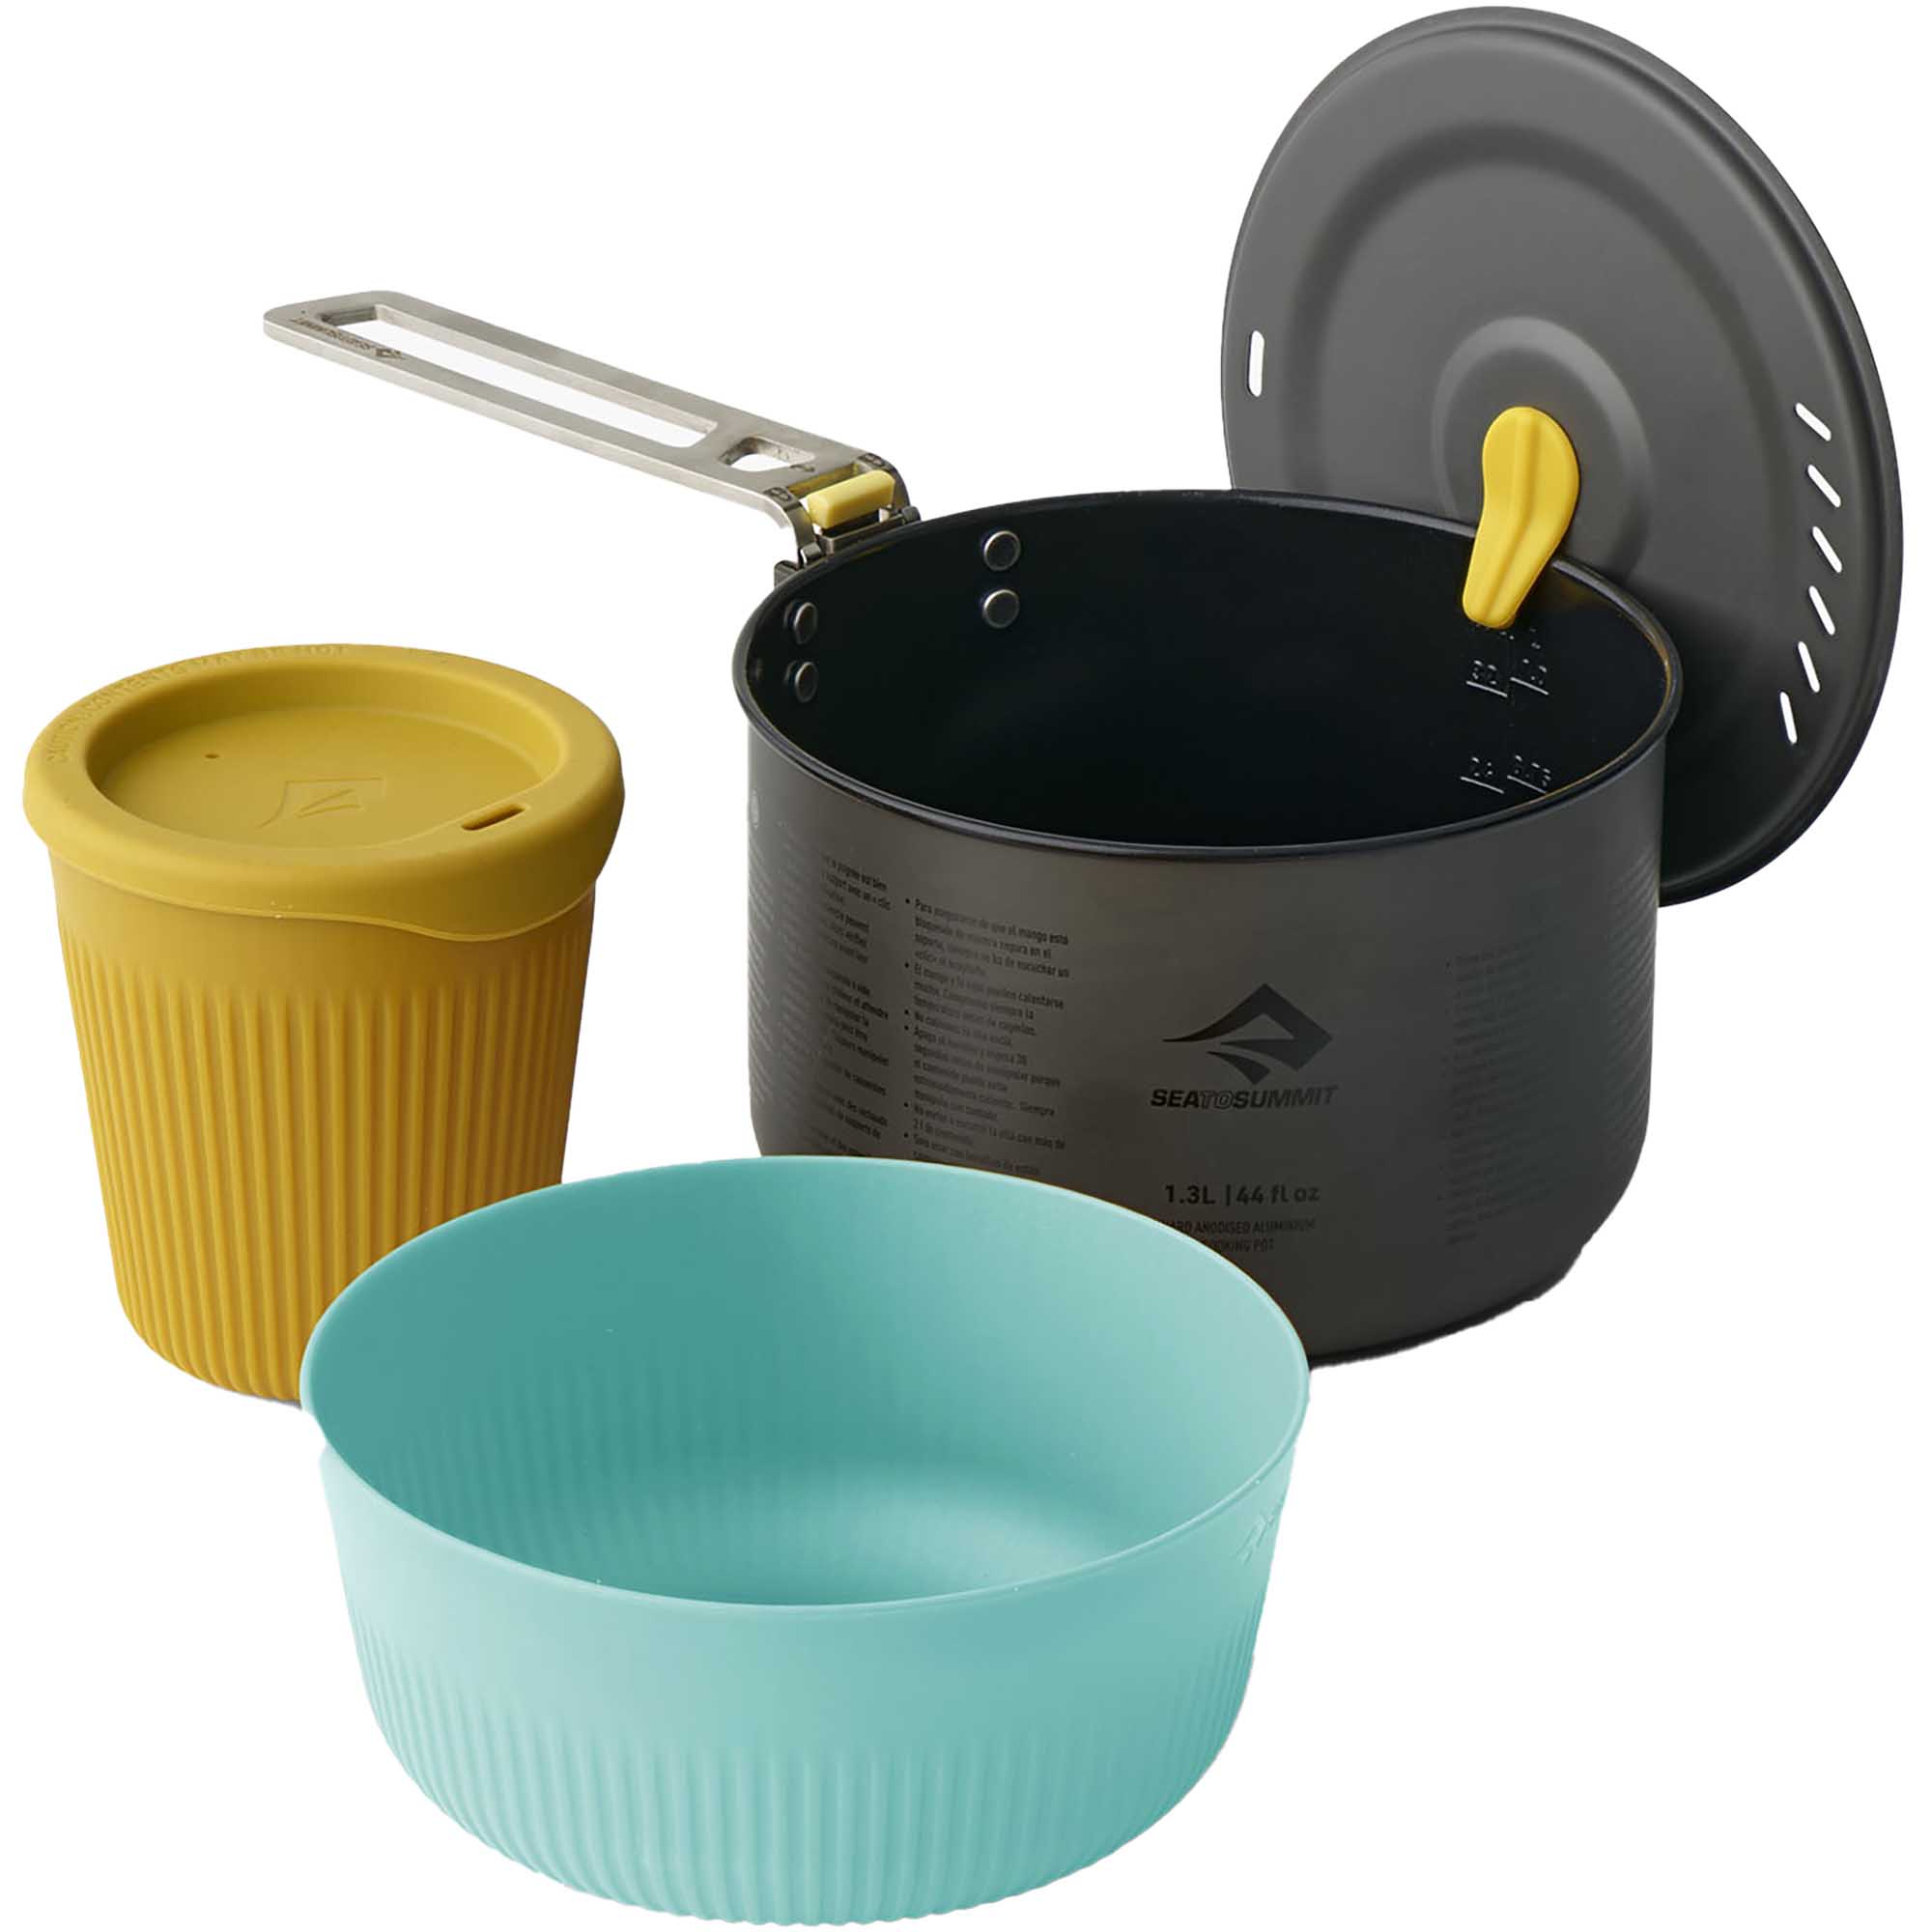 Sea to Summit Frontier 3pc Ultralight One Pot Cook Set